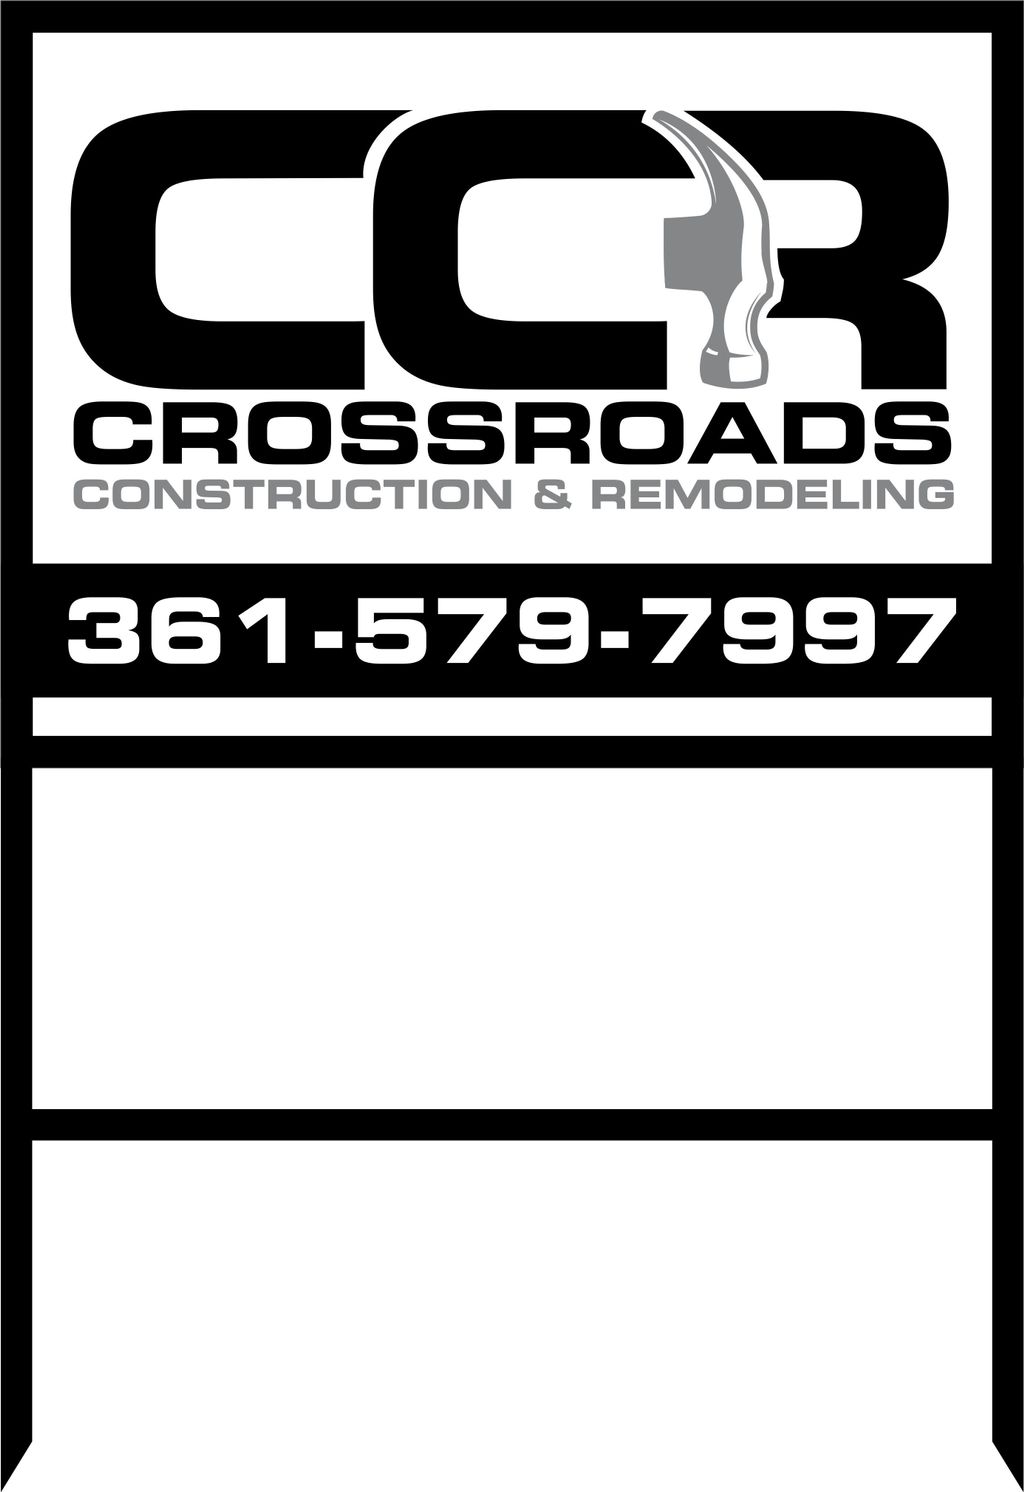 Crossroads construction and remodeling.